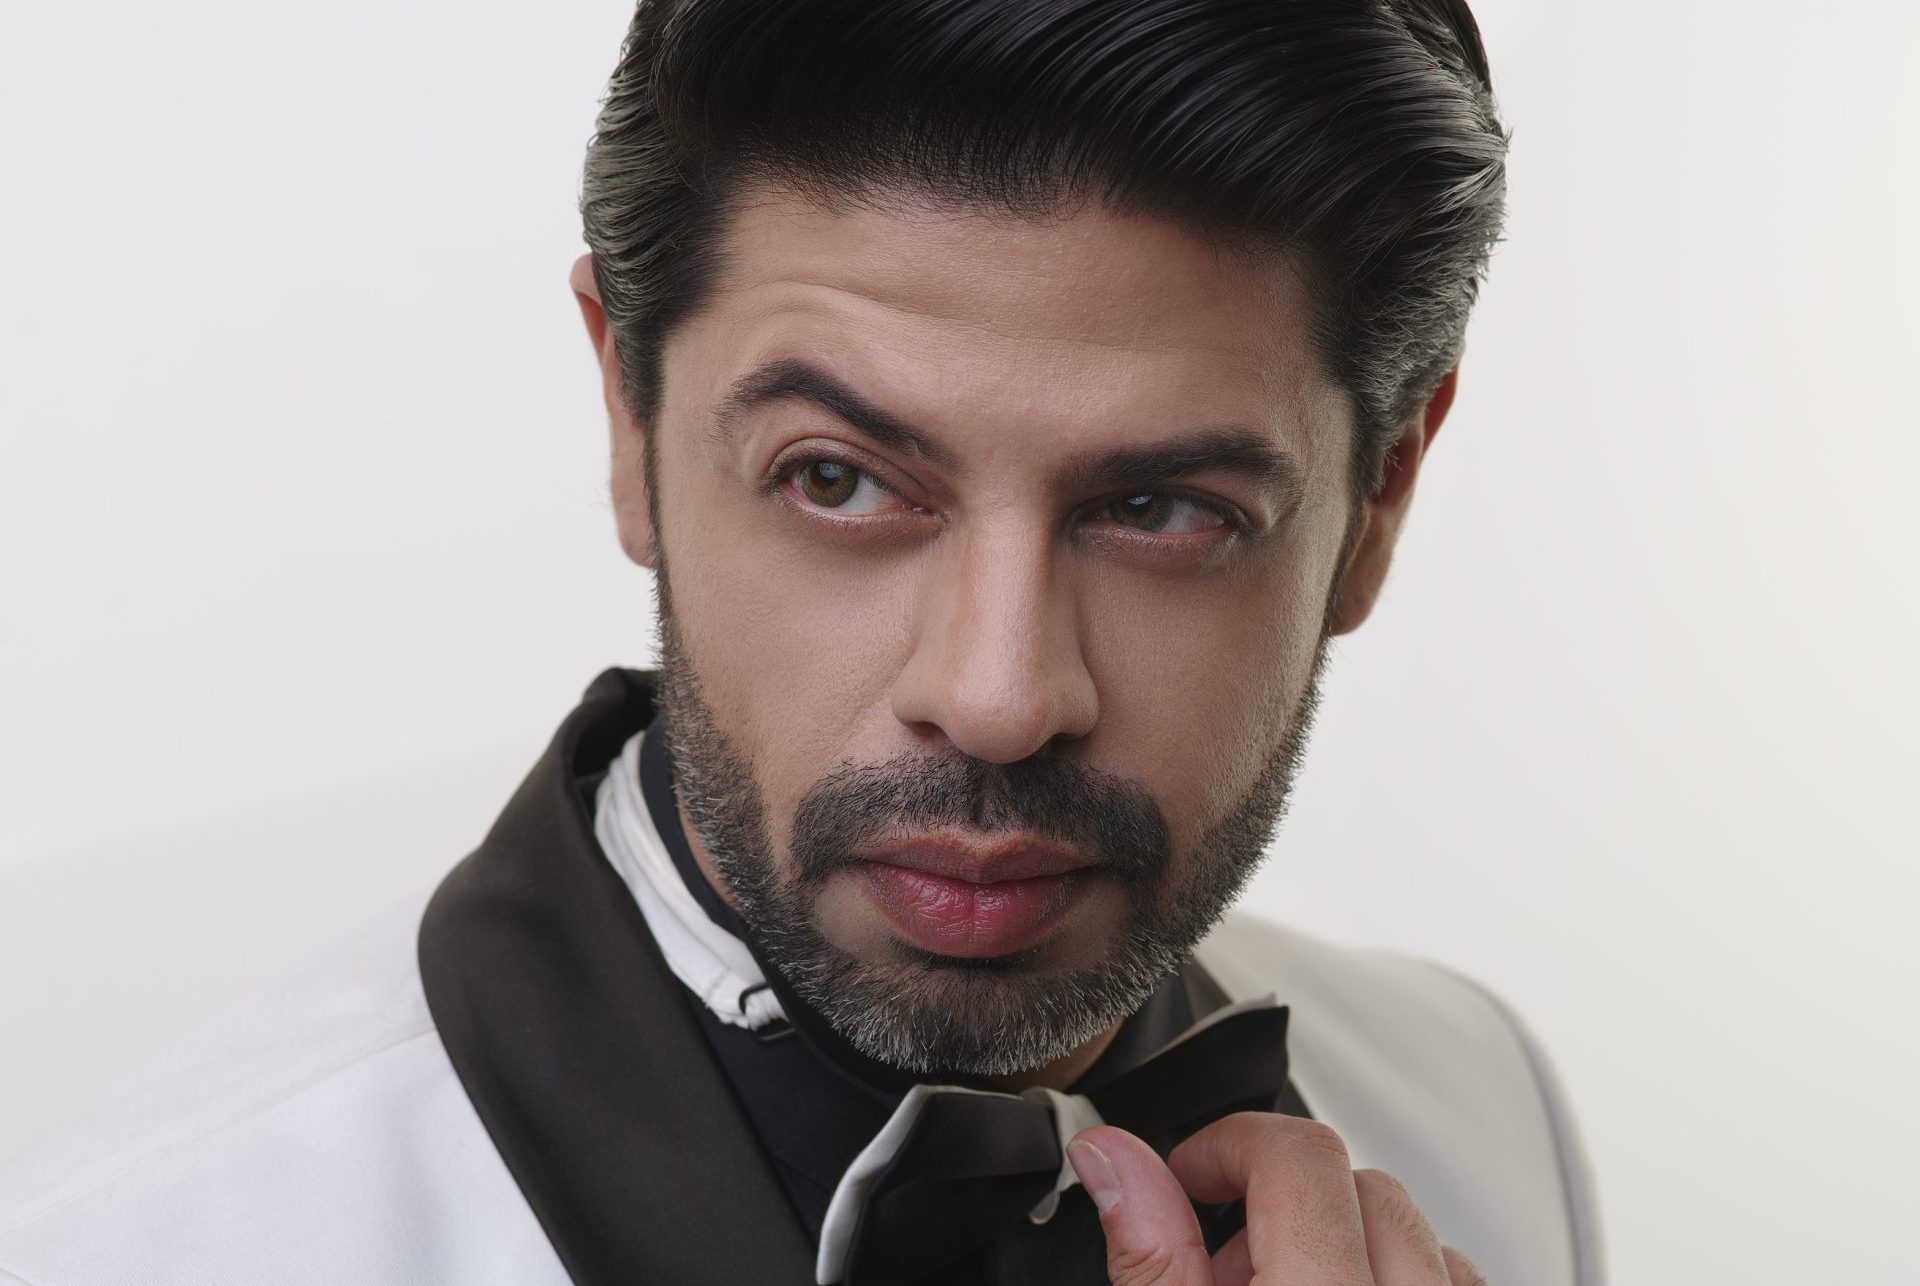 ‘Stability, respect, space, trust, being there for each other in tough times and holding hands are what true love is all about,’ says Ssumier S Pasricha!